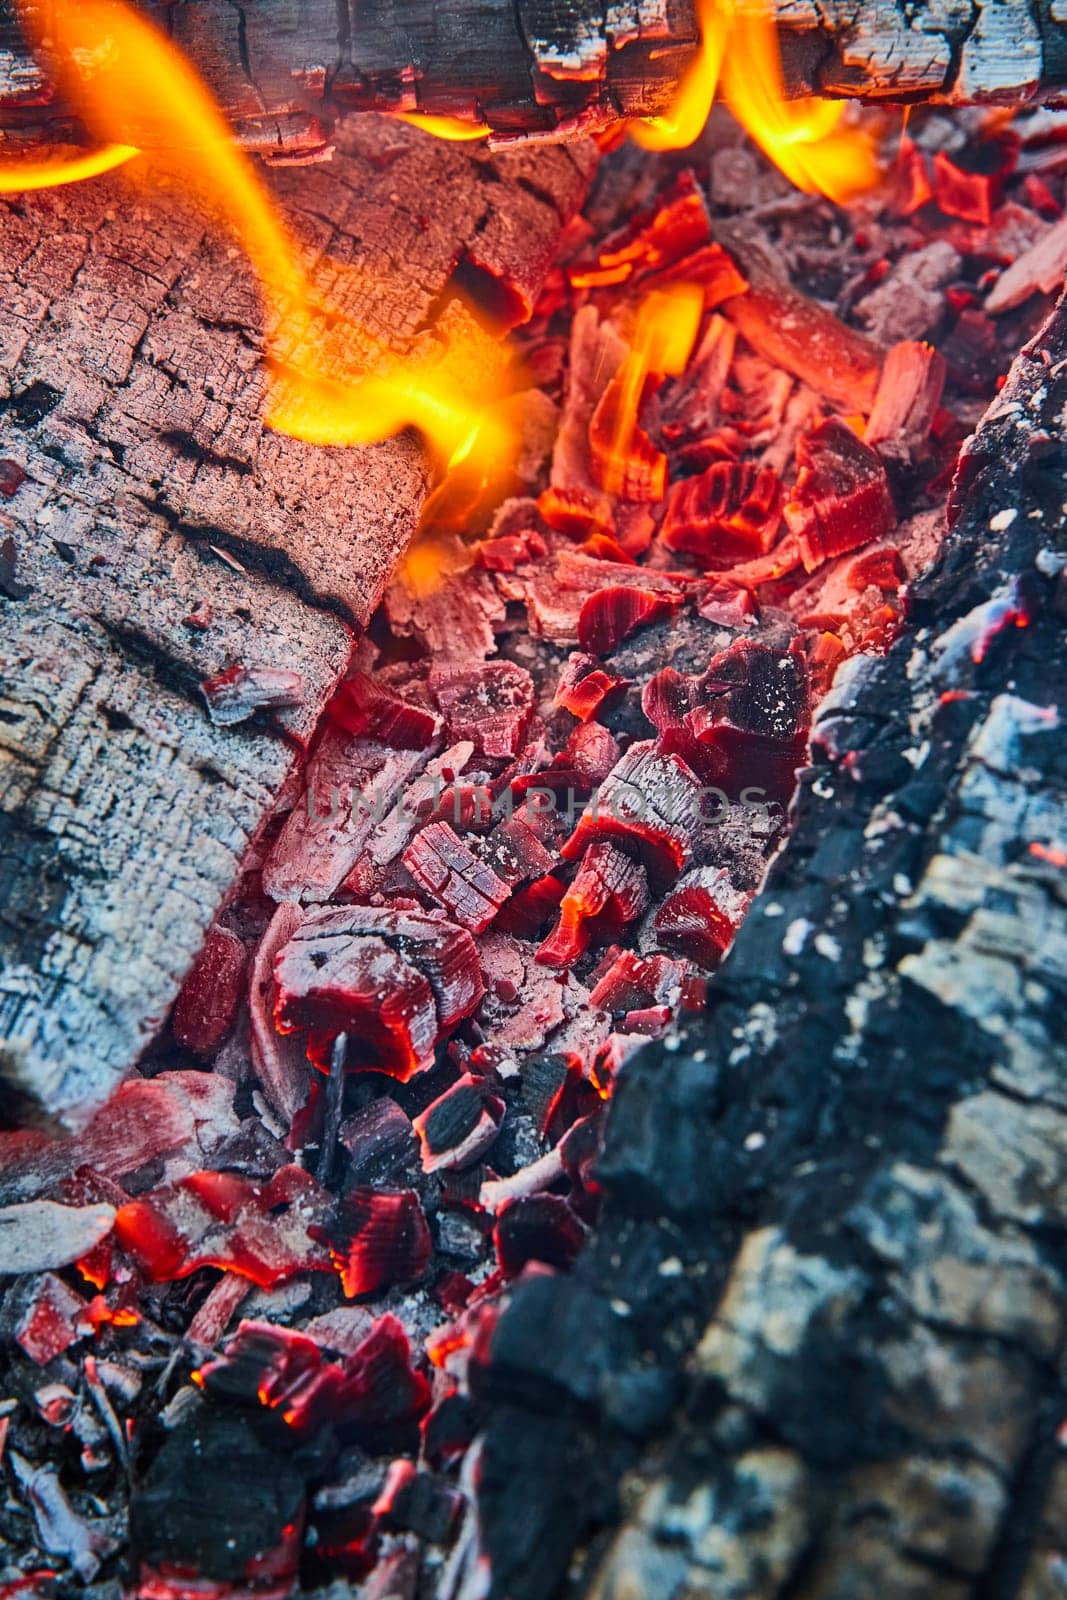 Image of Macro view burning red embers with blackened logs and white ashes background asset